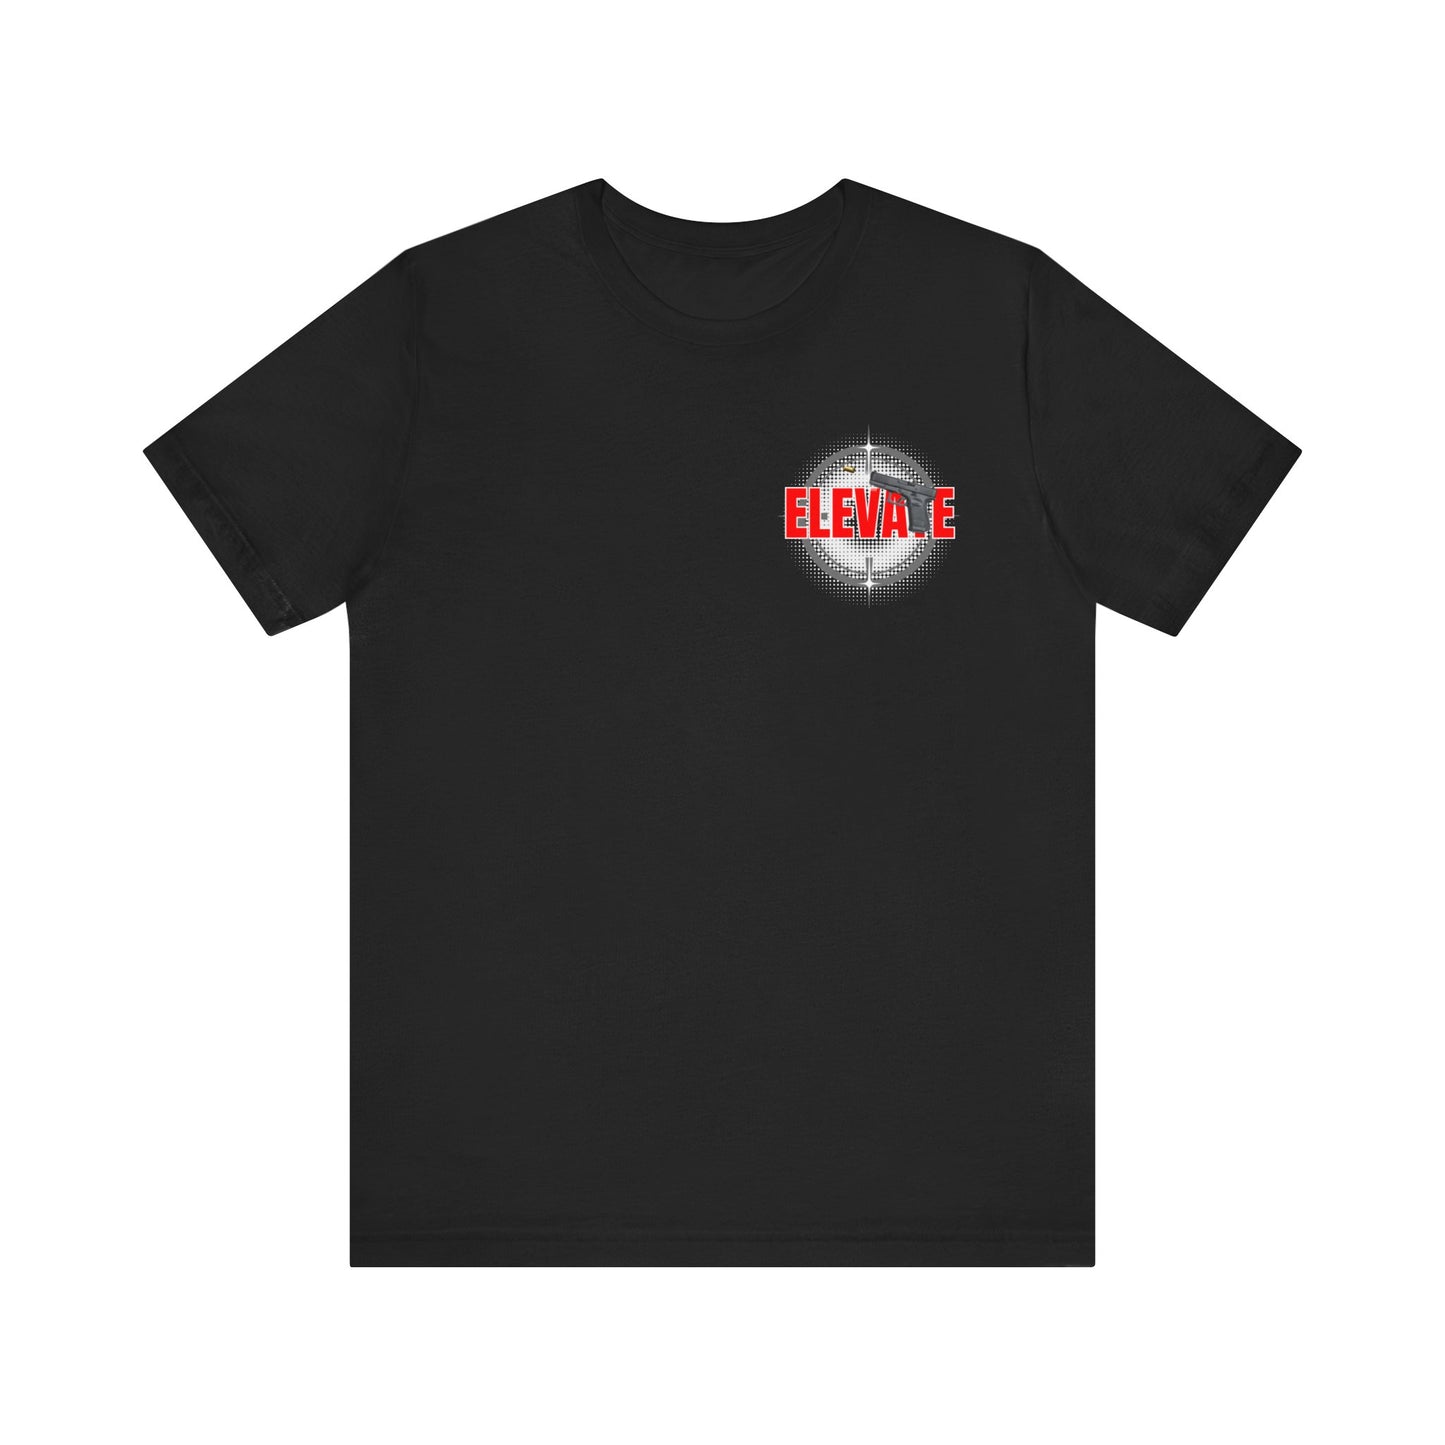 "1 IN THE CHAMBER" Graphic T-Shirt